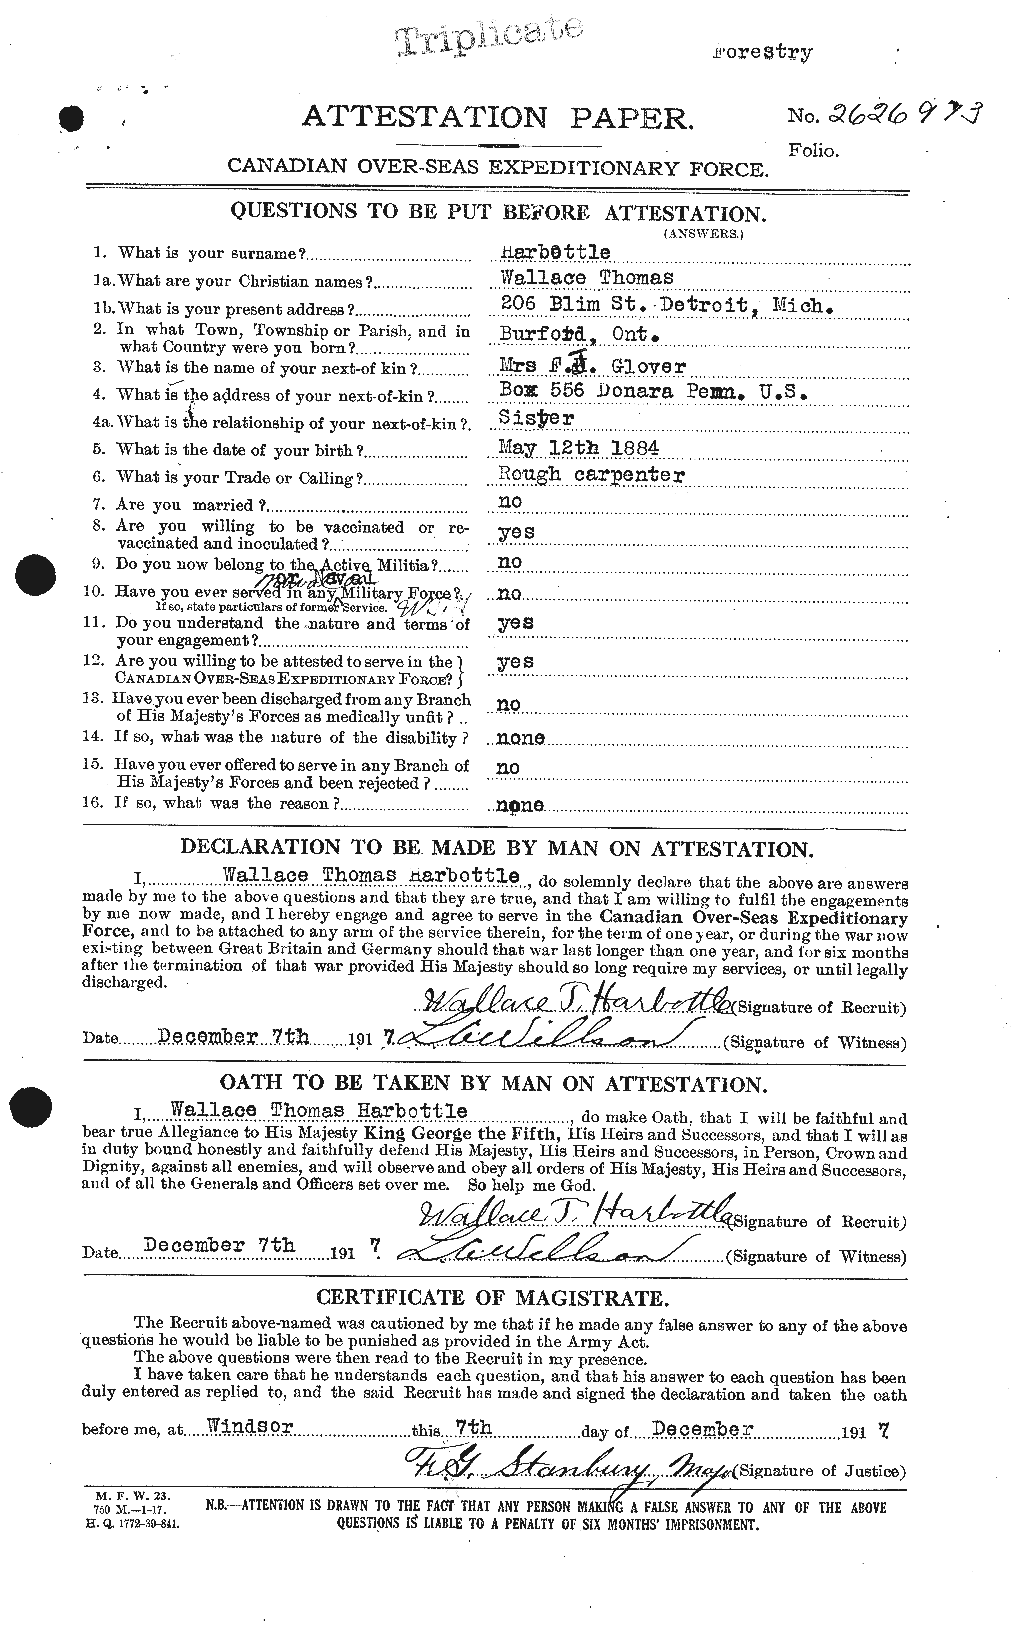 Personnel Records of the First World War - CEF 376175a